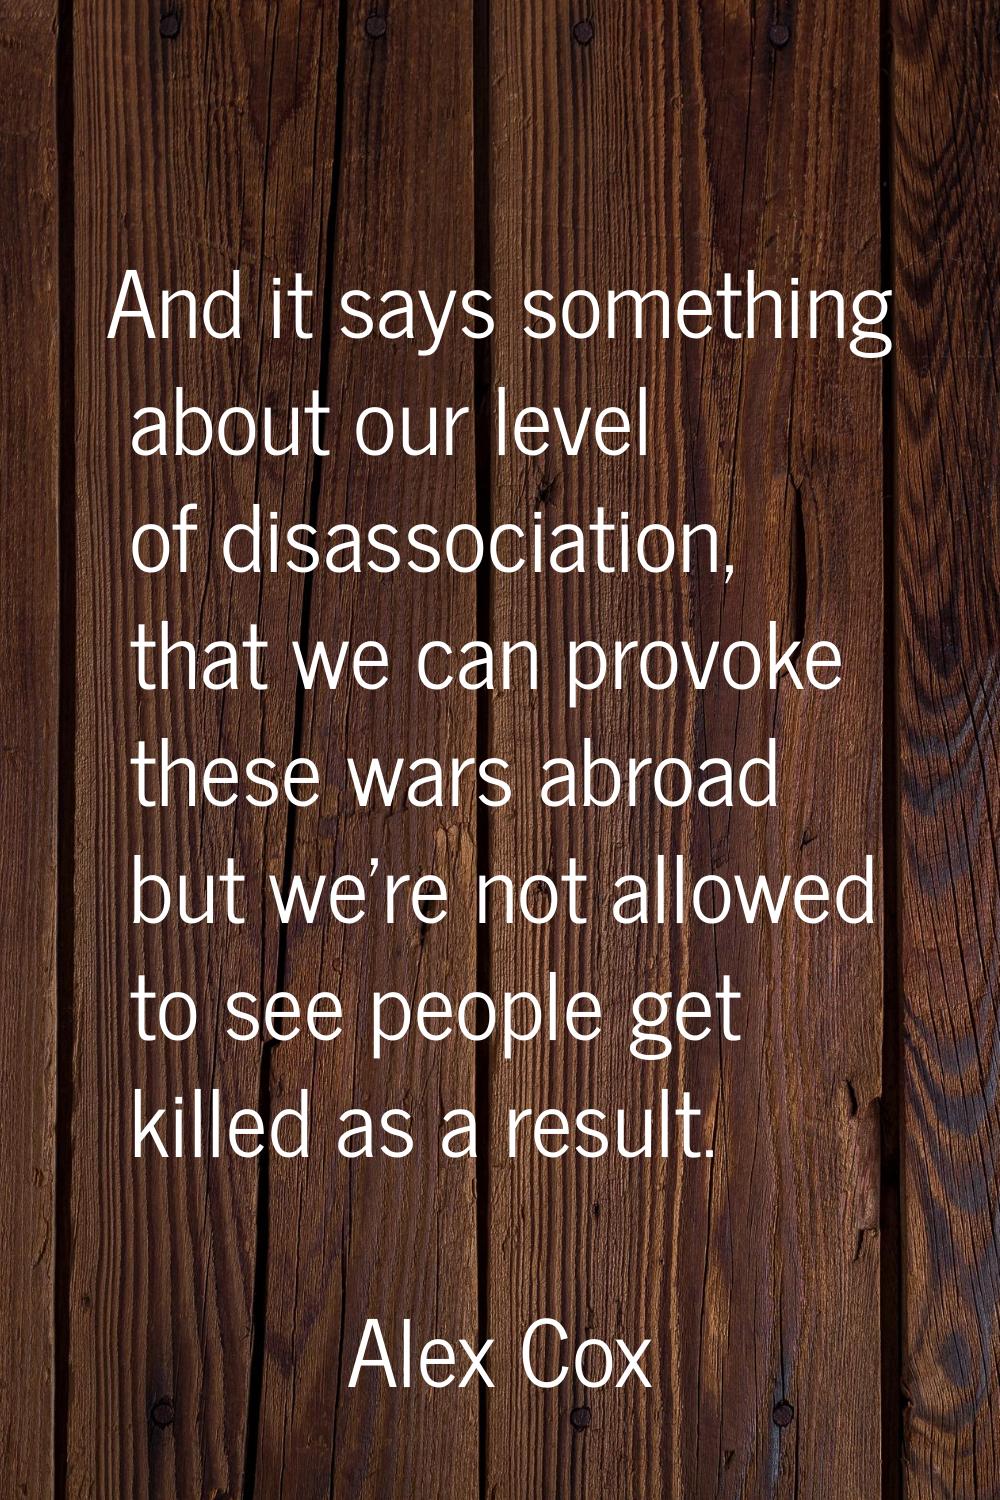 And it says something about our level of disassociation, that we can provoke these wars abroad but 